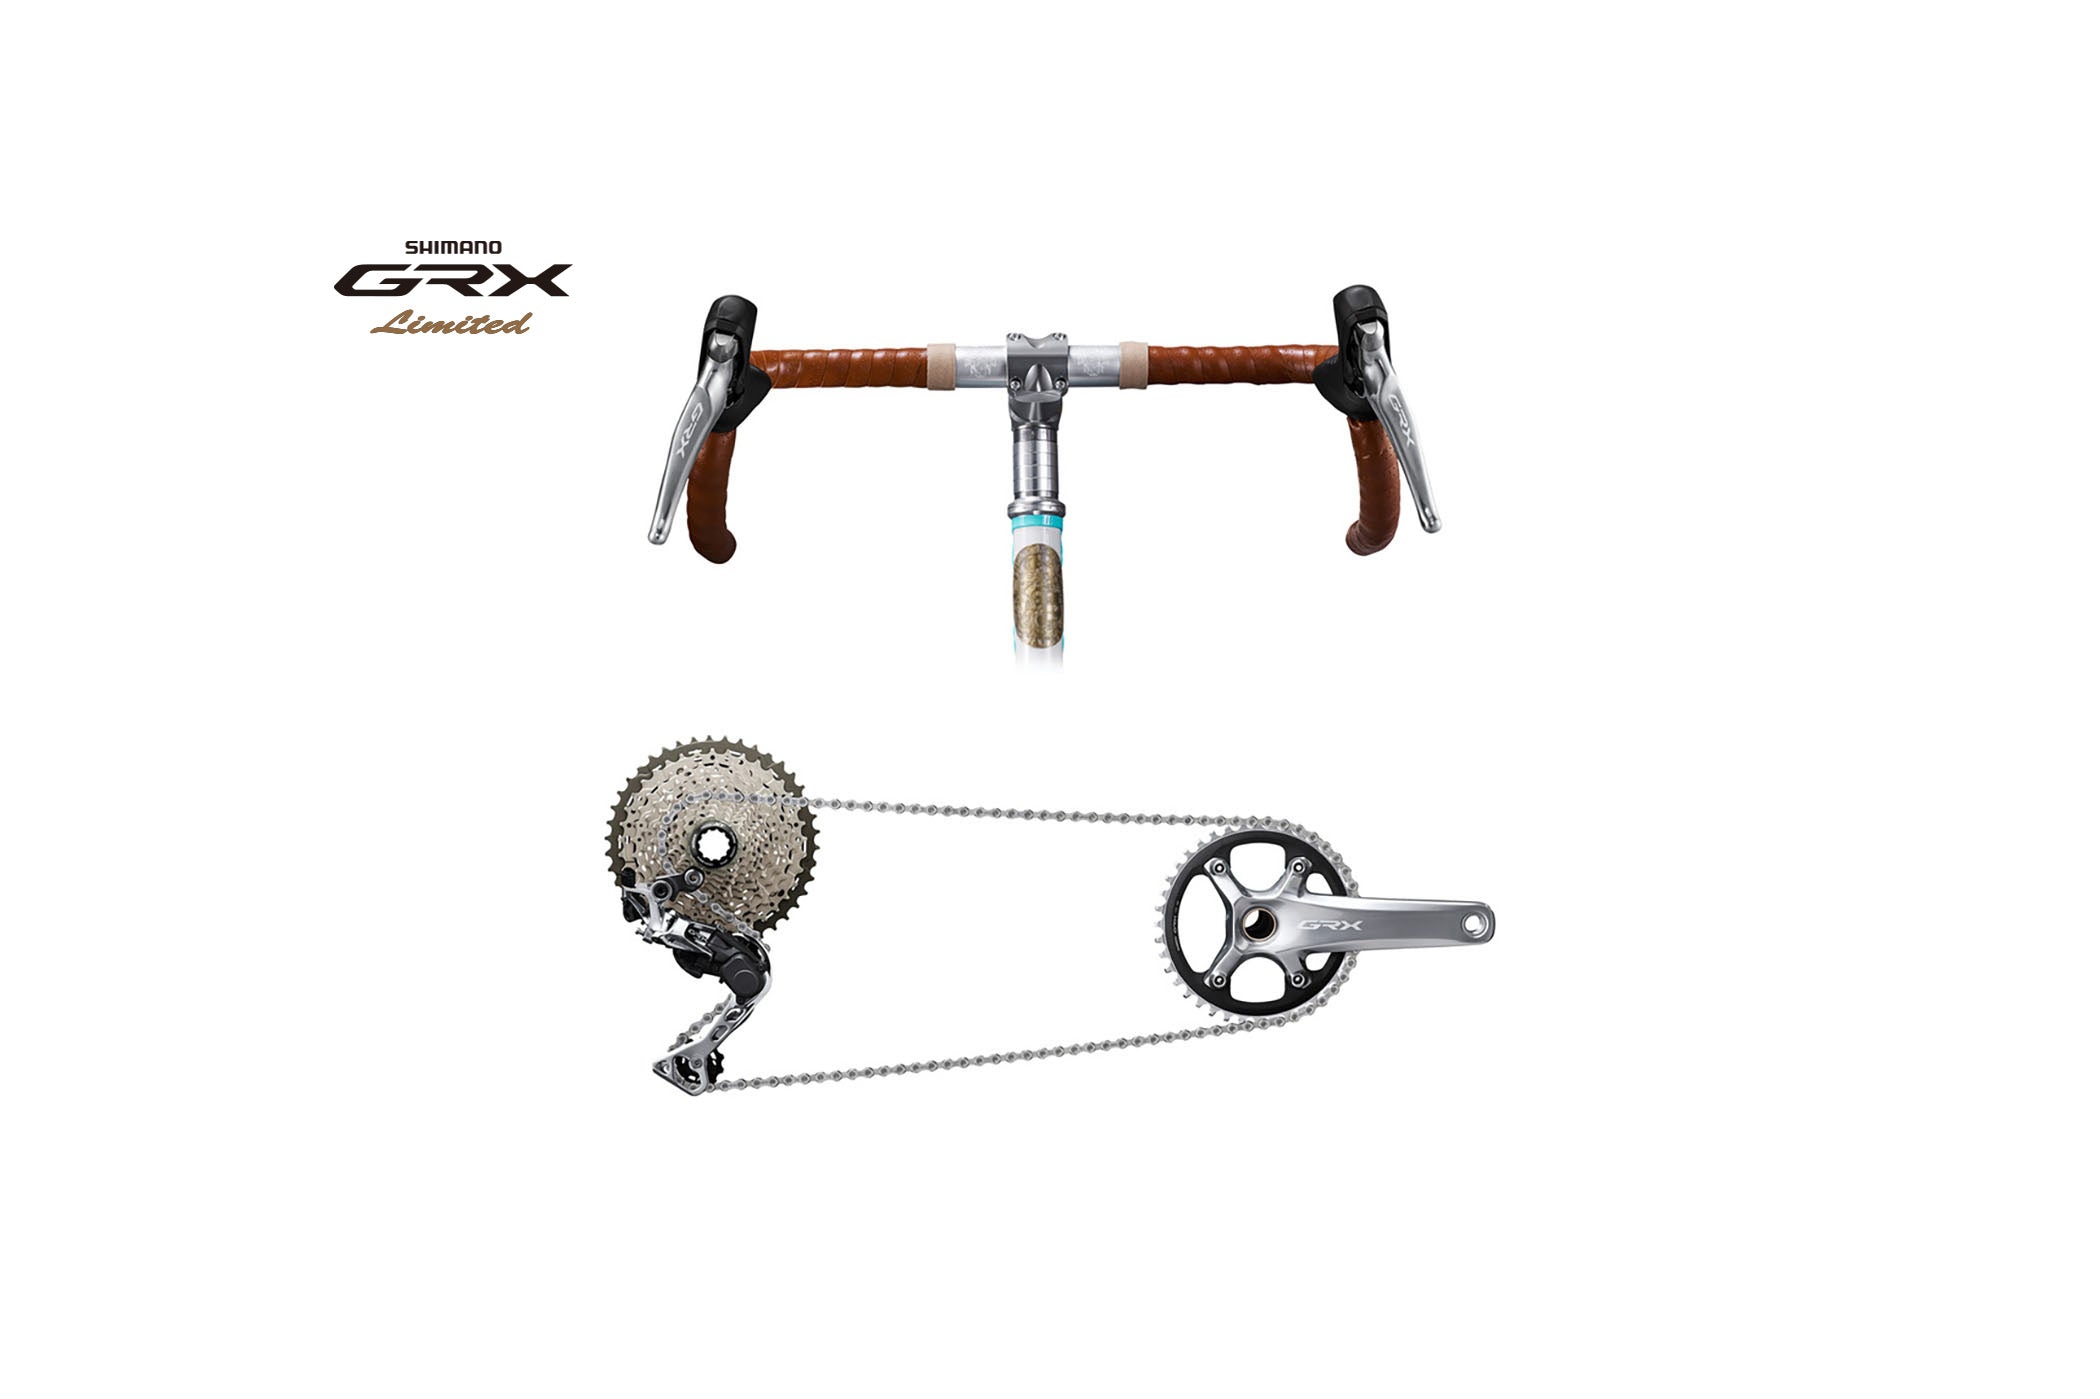 Shimano GRX LIMITED 1X11 Groupset | The Pro's Closet